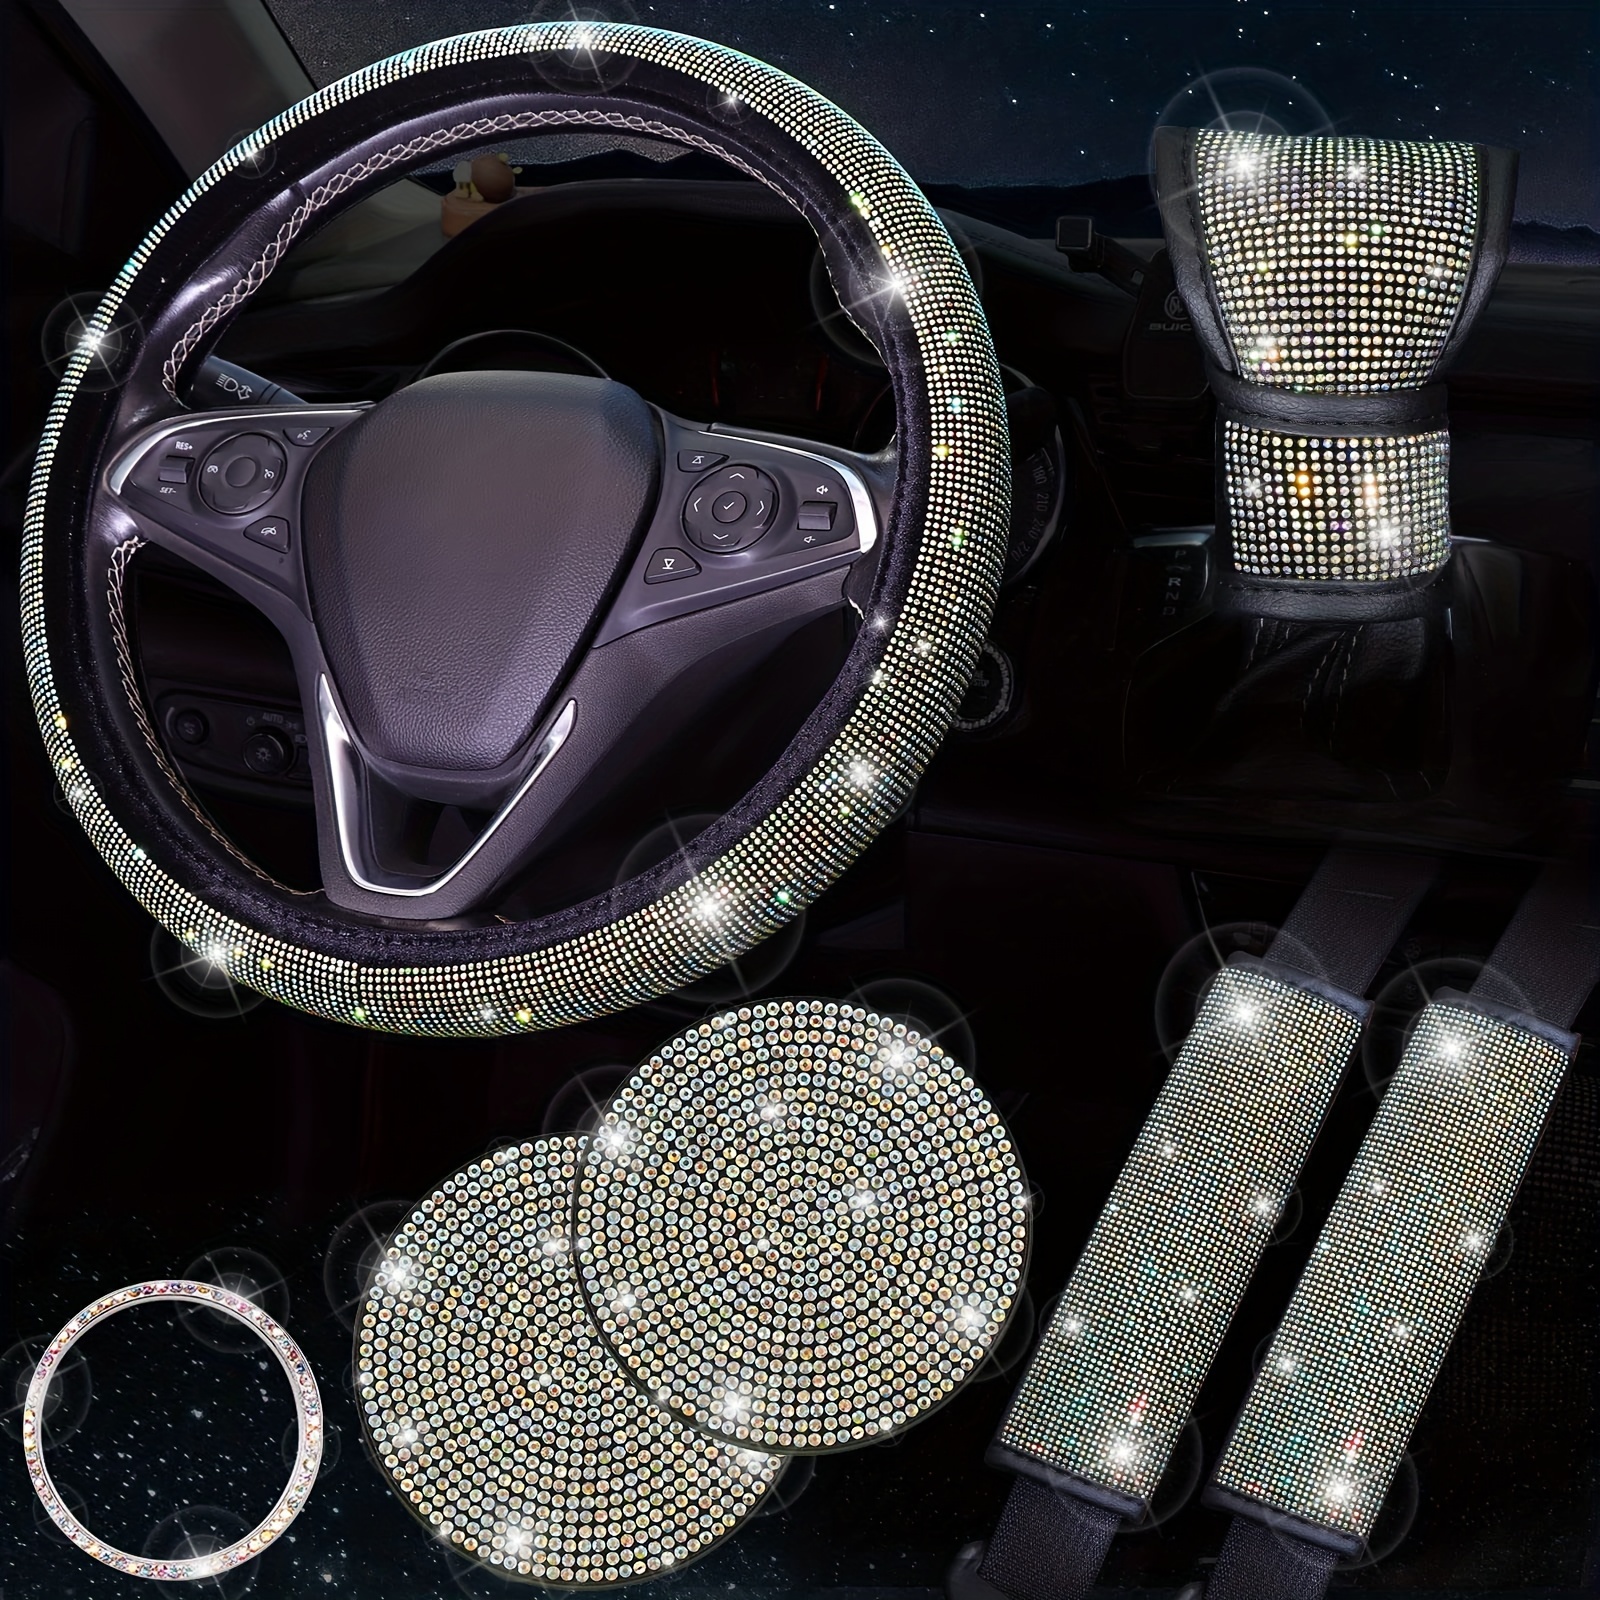 

7-piece Bling Car Interior Accessory Set With Diamond Steering Wheel Cover, Sparkling Rhinestone Seat Belt And Gear Shift Covers, Cup Coasters - Polyester Fiber Deluxe Combo Pack